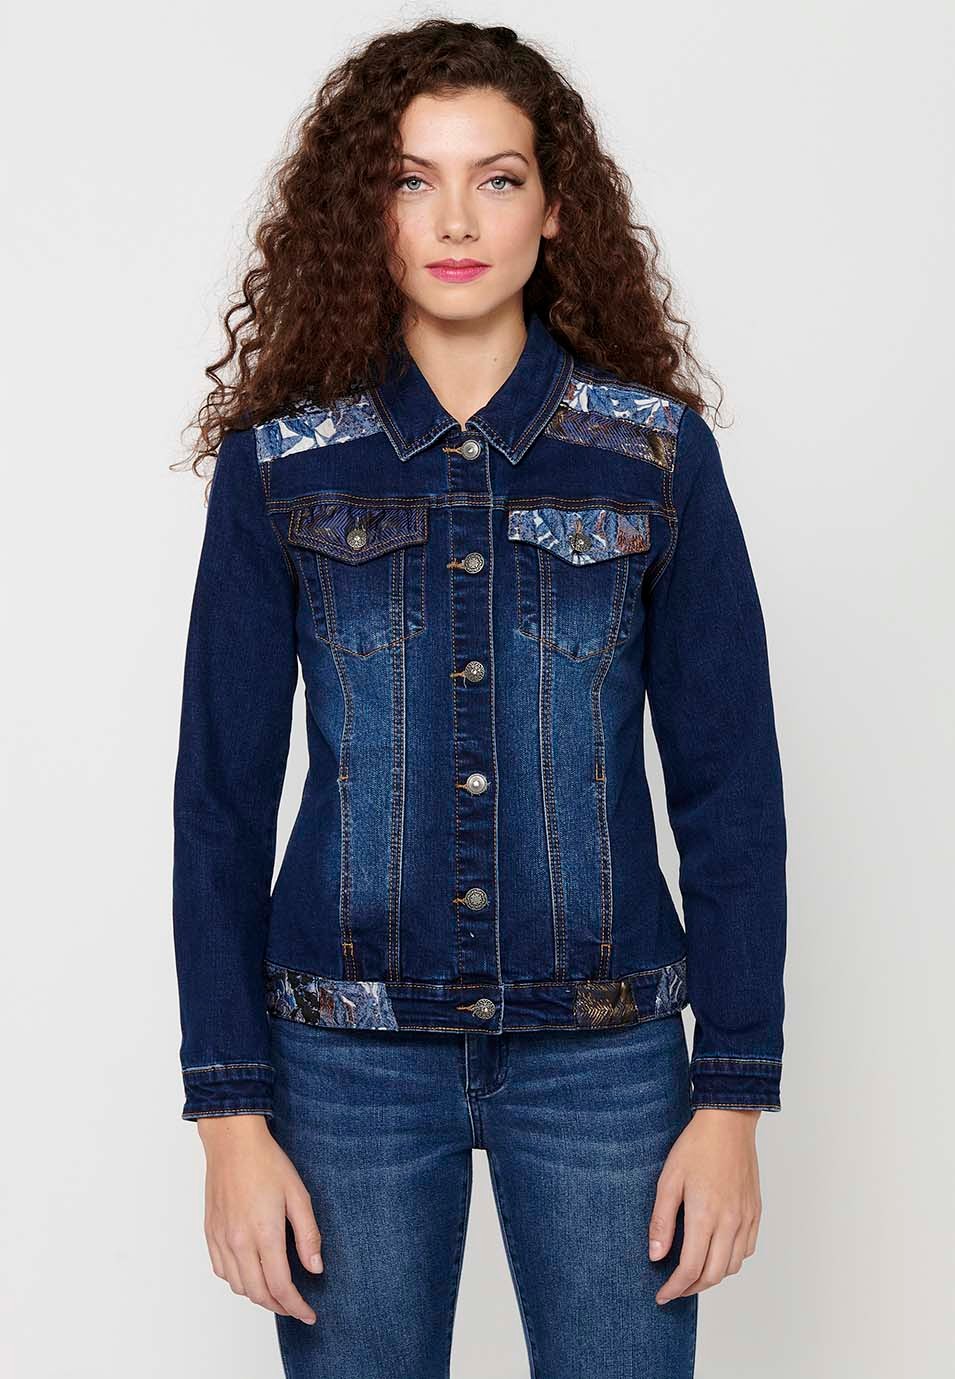 Dark Blue Long Sleeve Denim Jacket with Button Front Closure and Pockets with Embroidery on the Shoulders for Women 1